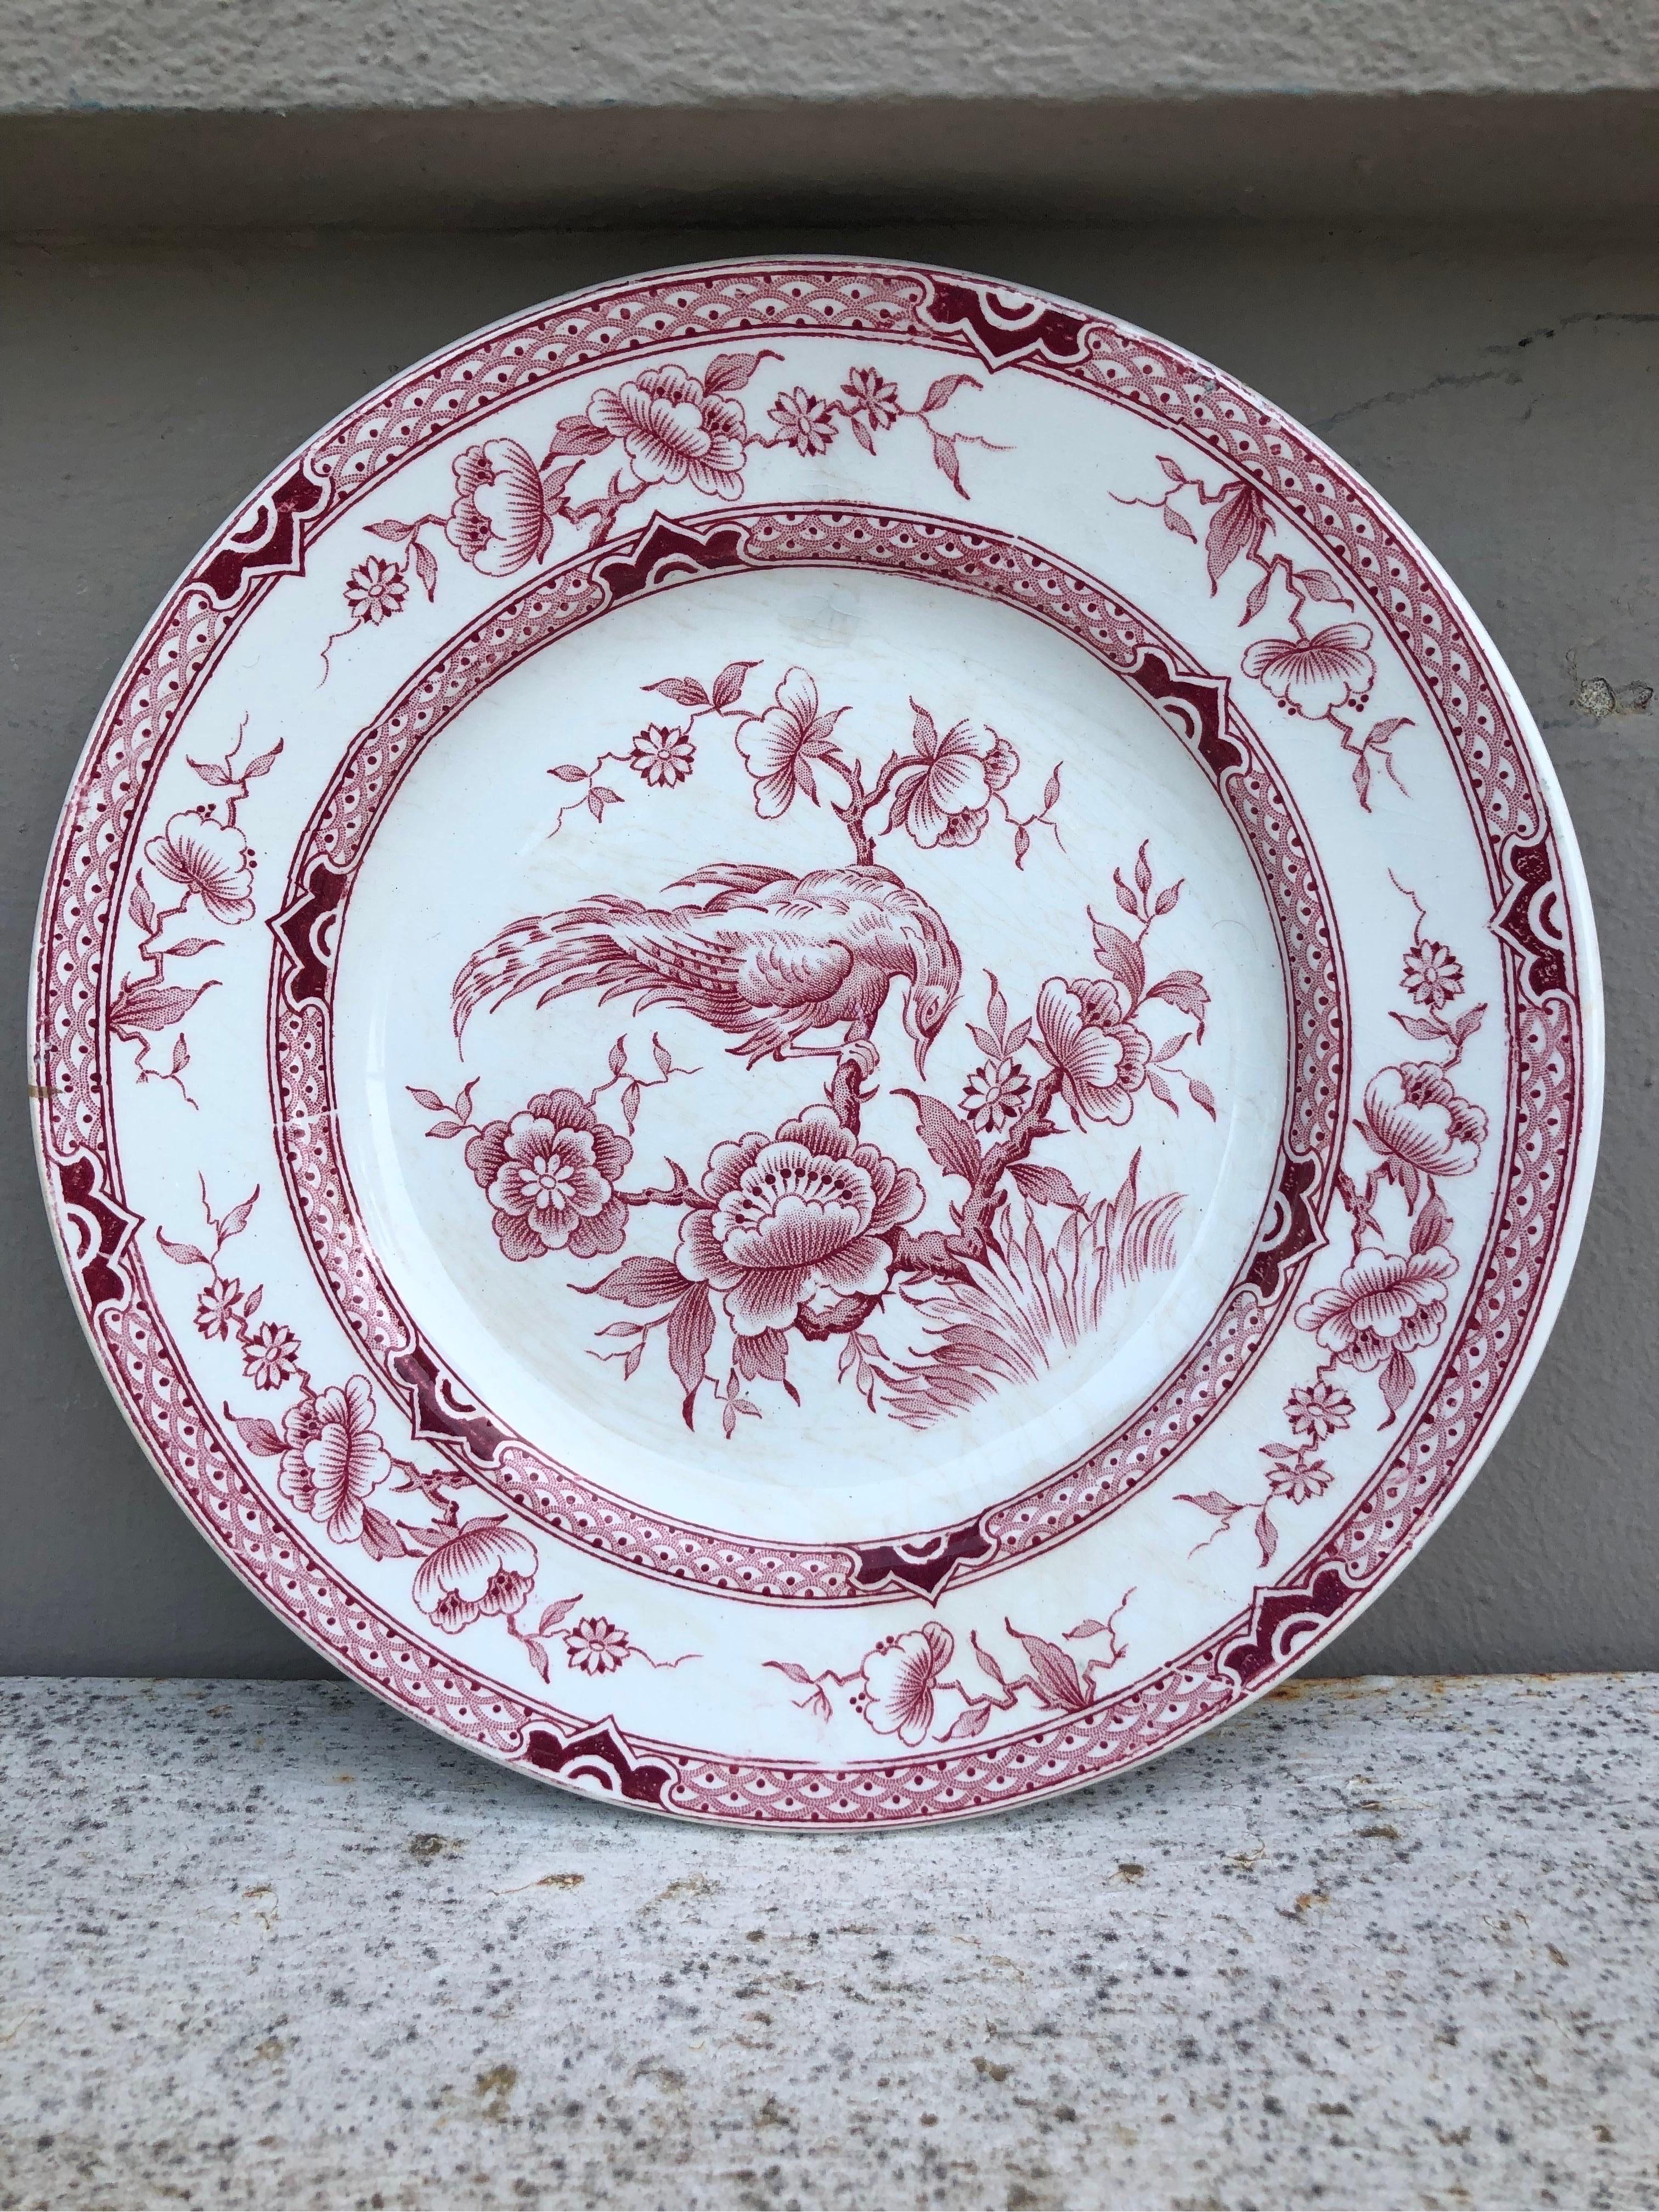 French Faience Pink Plate signed Moulin des Loups Hamage Orchies Circa 1900.
Chinoiserie period.
Bird and flowers.
4 plates available.